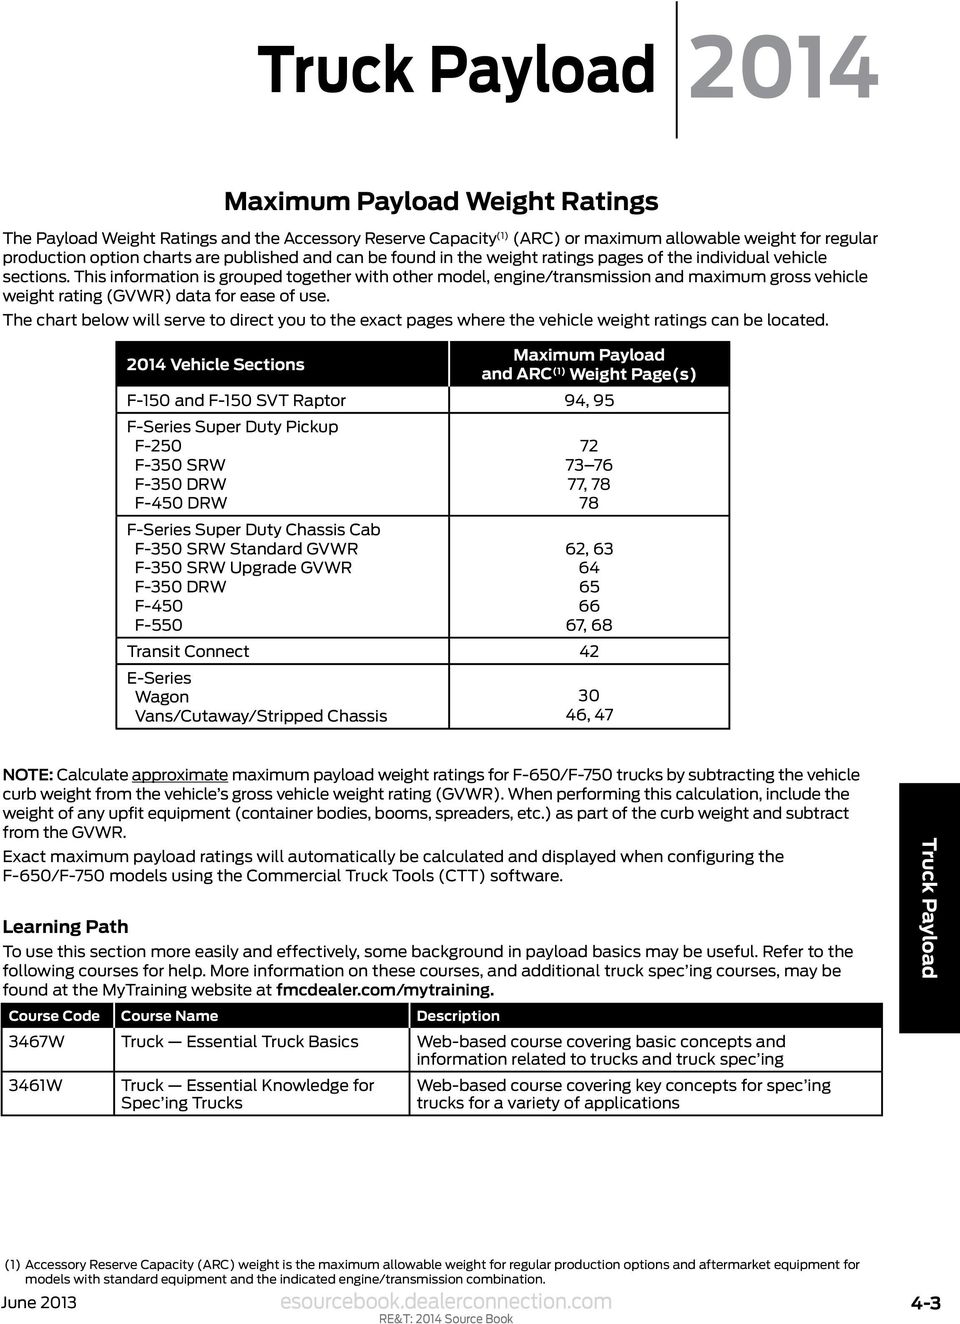 Truck Payload Basic Truck Weight Definitions. esourcebook ...